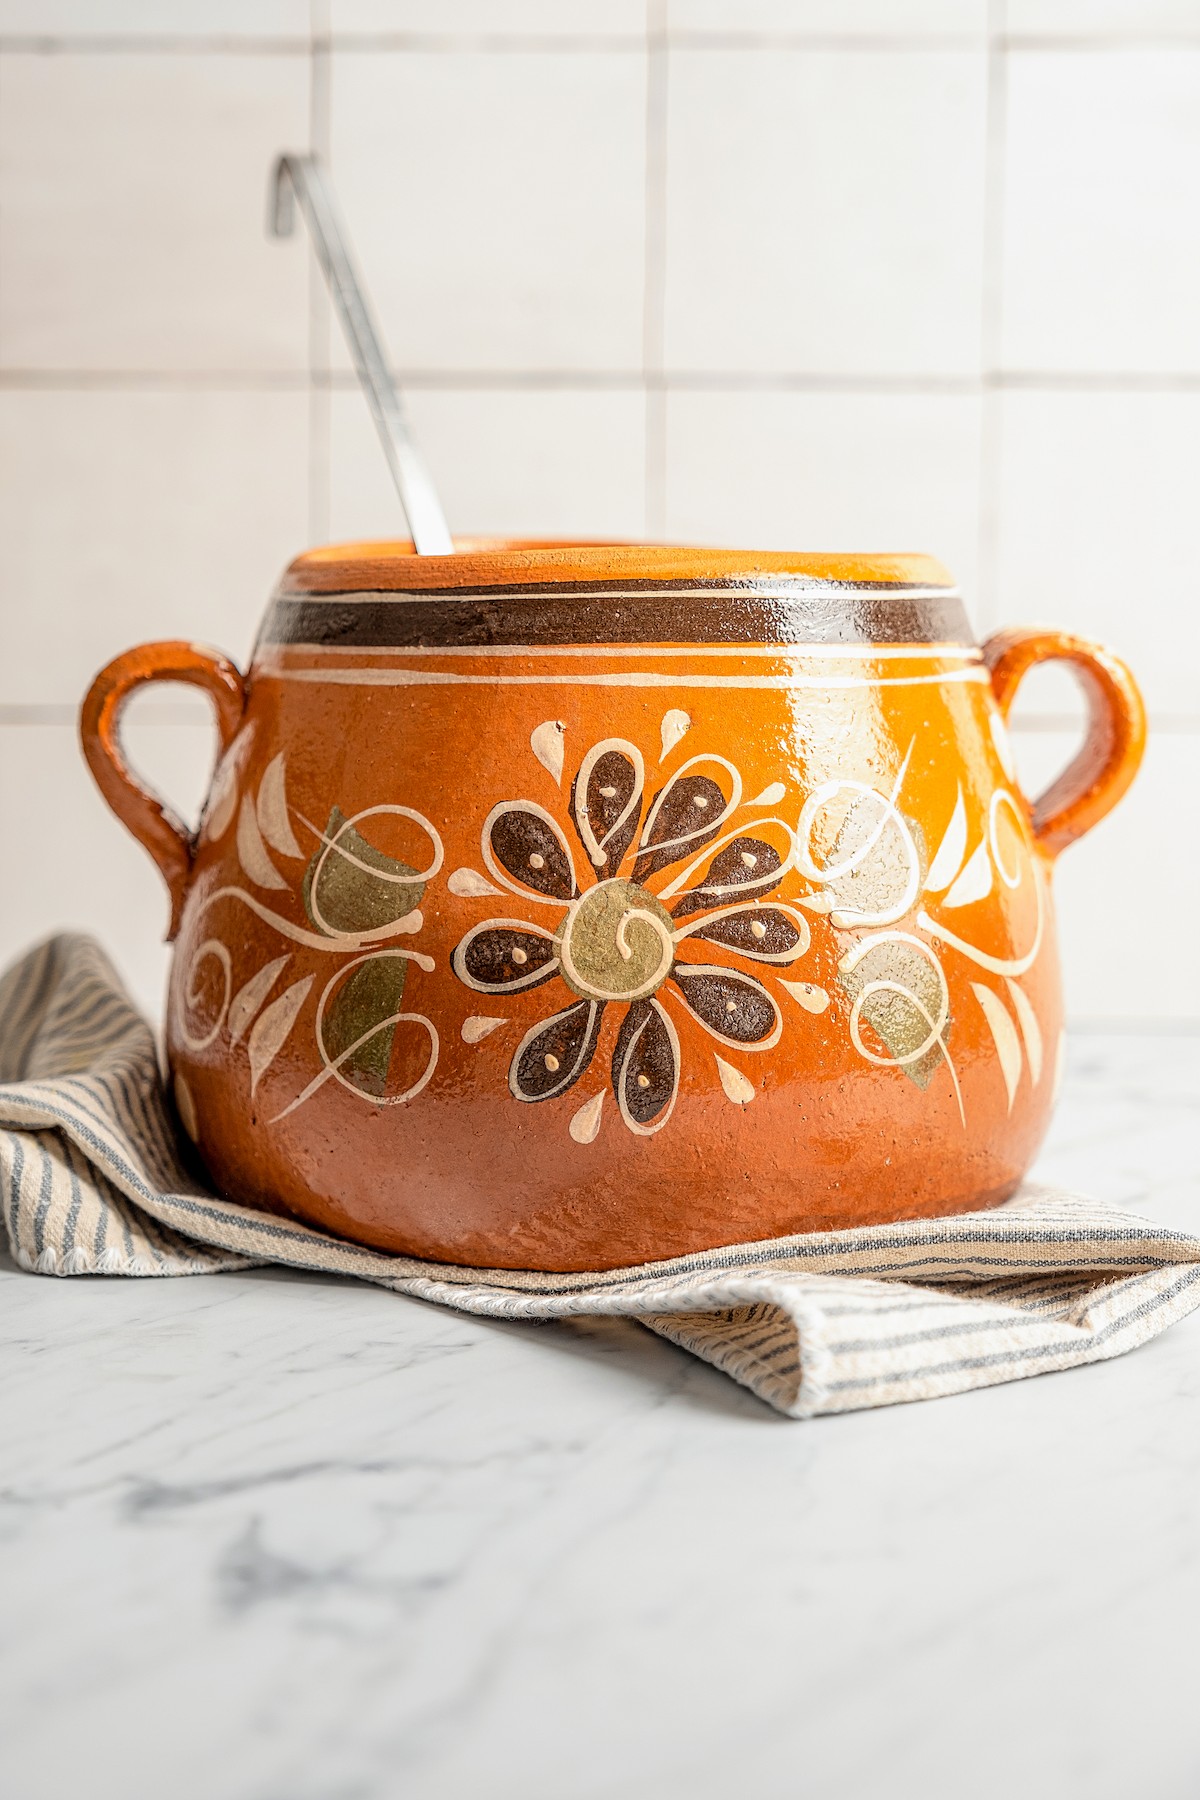 Mexican olla de barro with a ladle inside for serving.